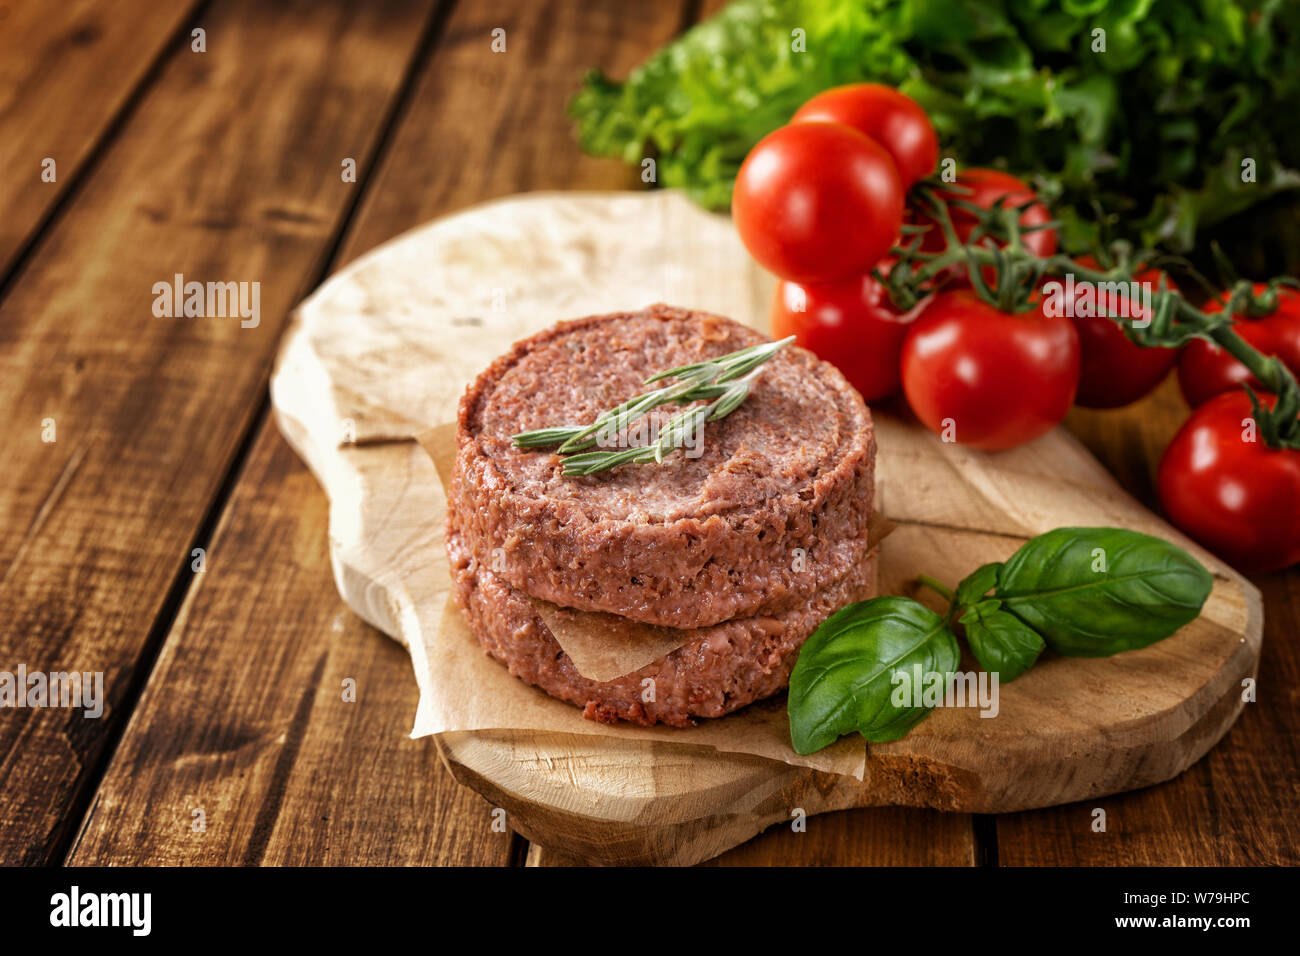 Top view of two raw vegan patties with vegetables and herbs on brown rustic background Stock Photo